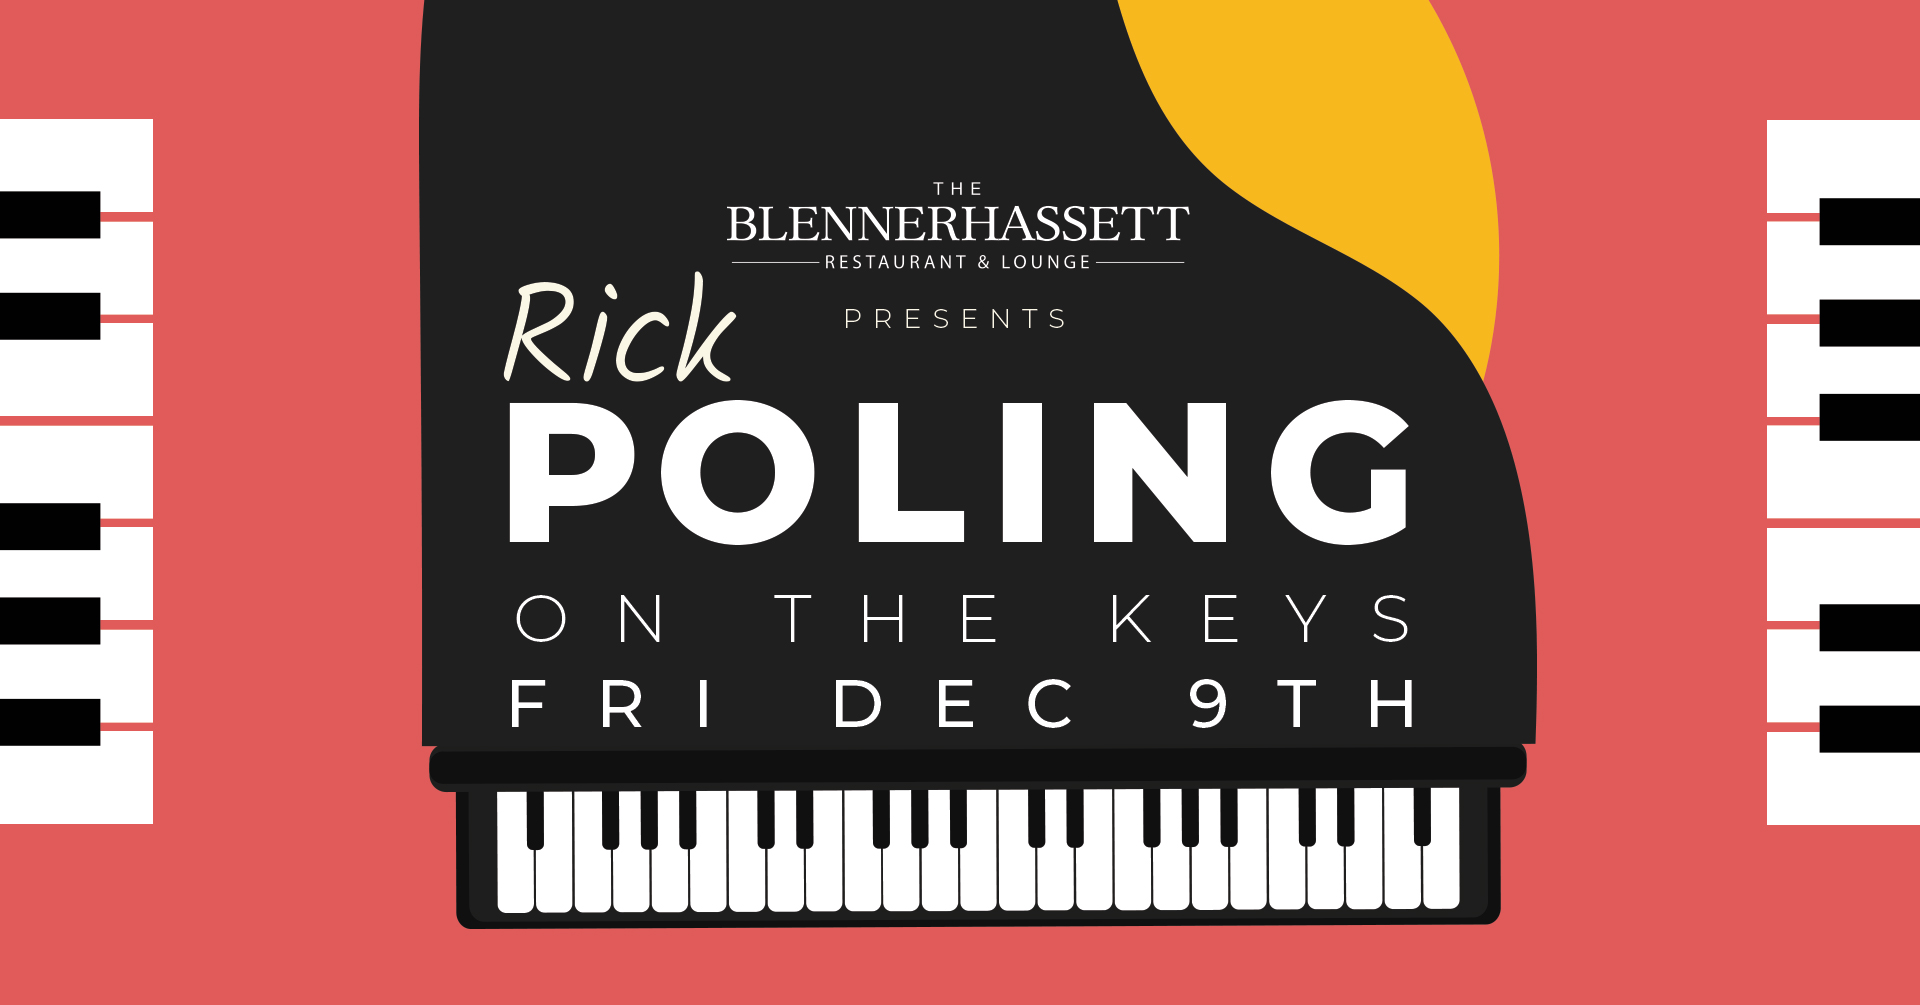 Rick Poling plays piano at The Blennerhassett Restaurant and Lounge on Fri Dec 9th